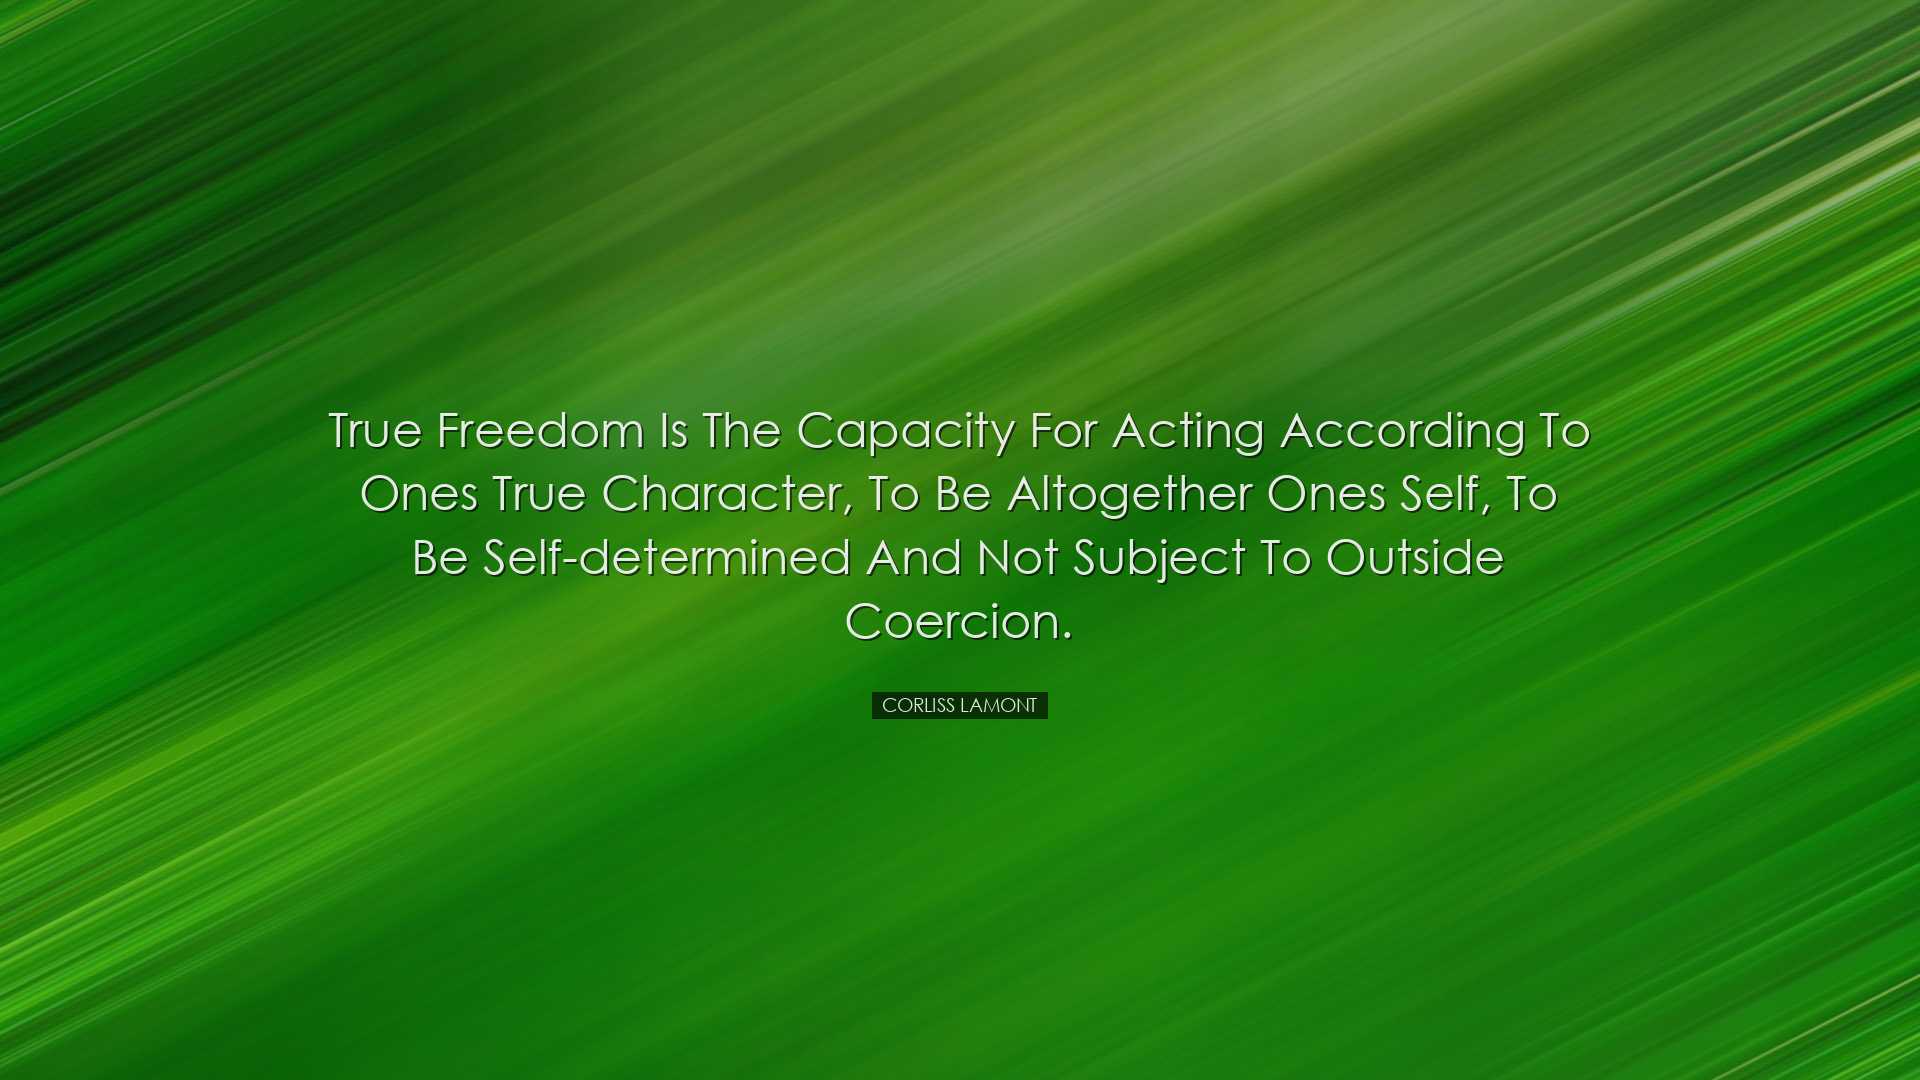 True freedom is the capacity for acting according to ones true cha